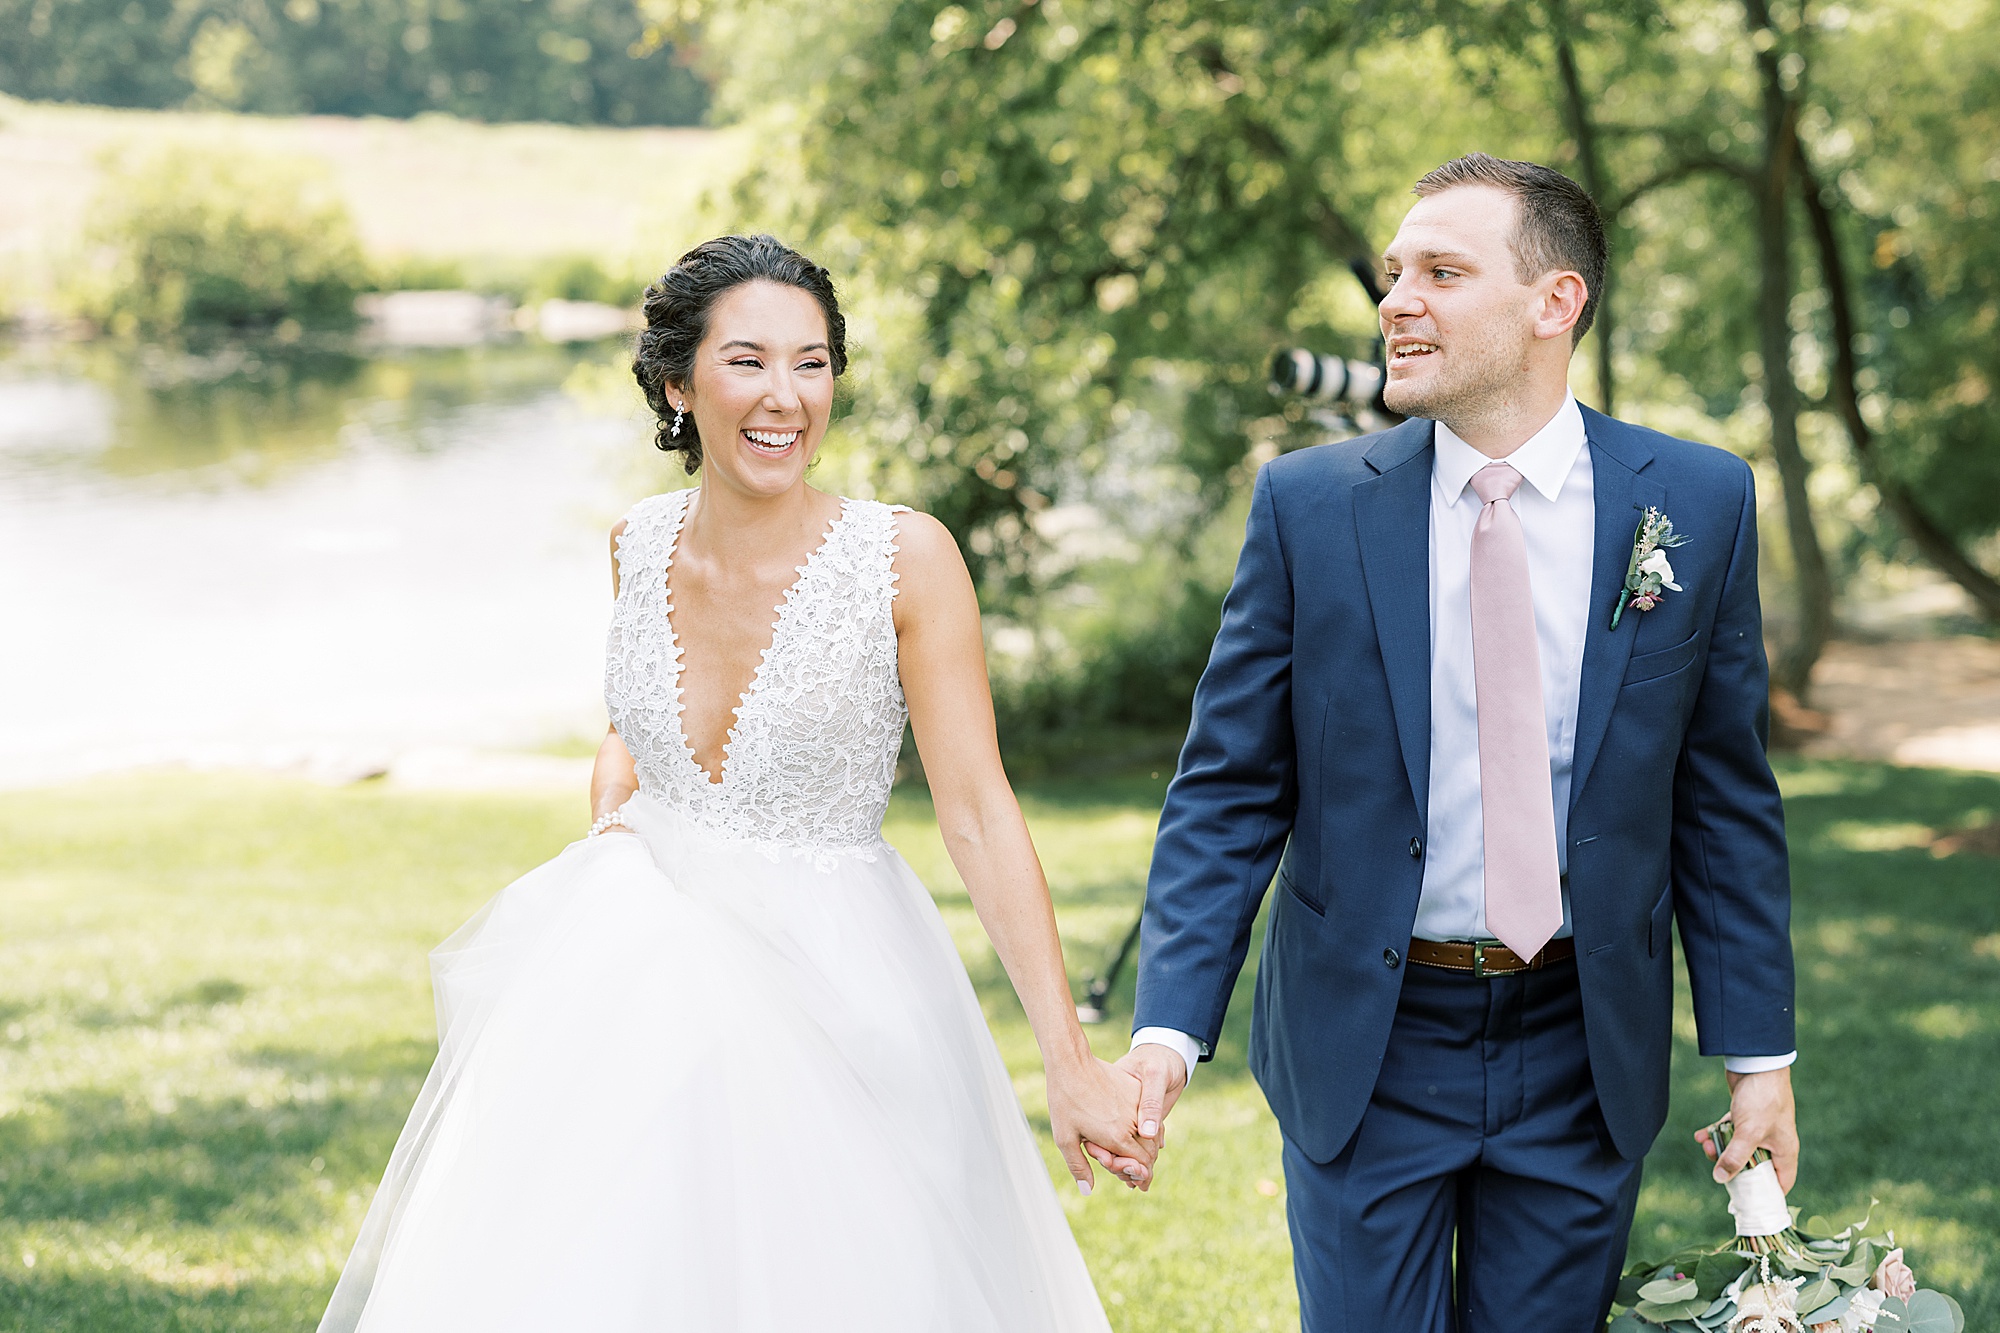 newlyweds smile and laugh walking together by creek